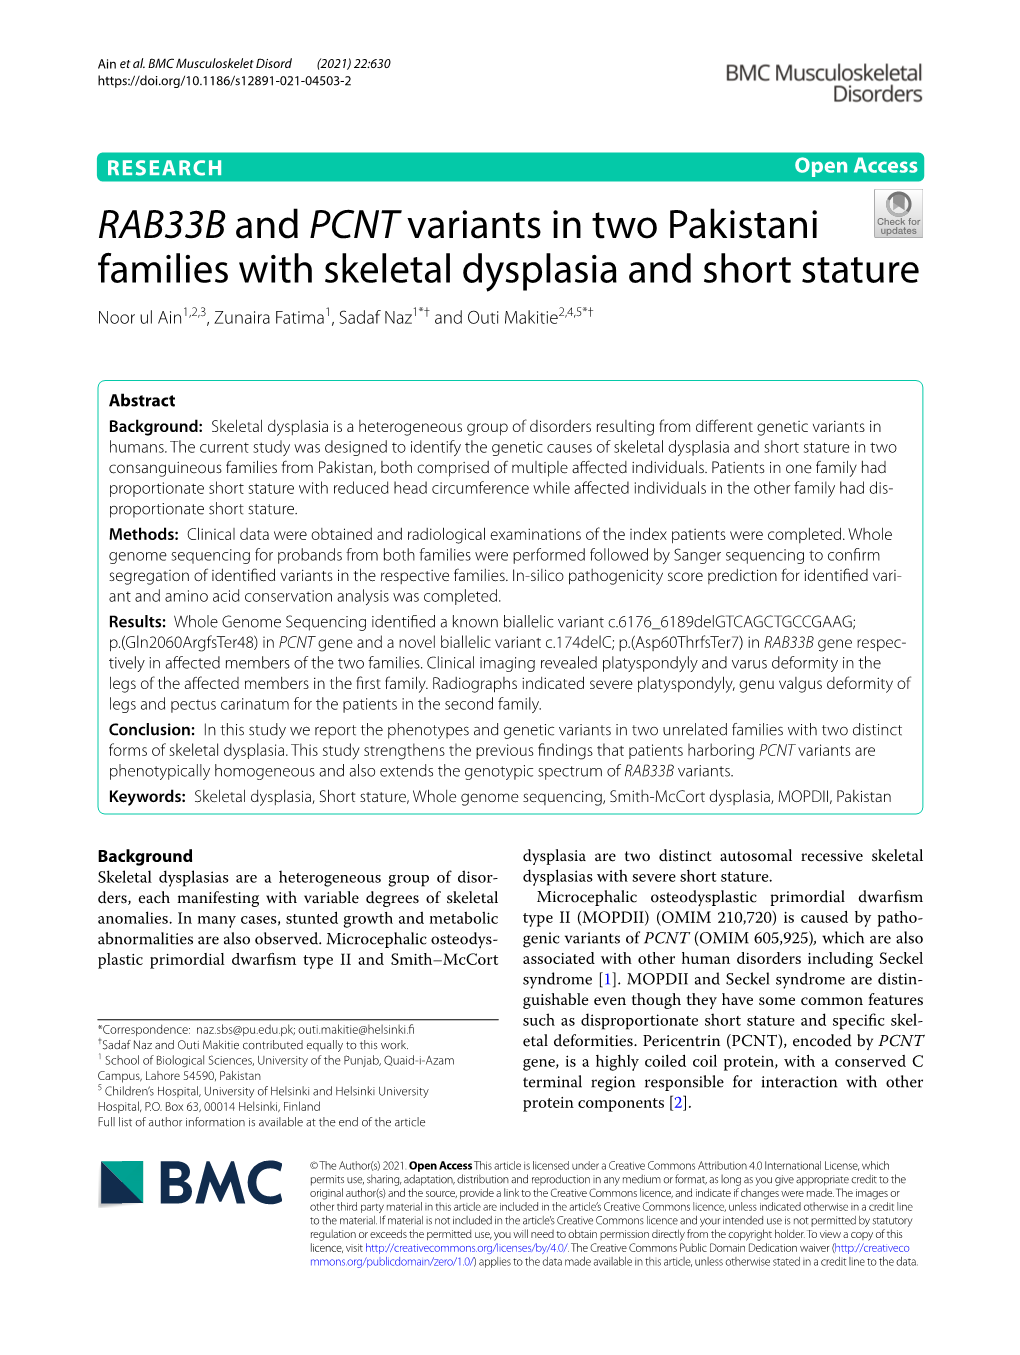 RAB33B and PCNT Variants in Two Pakistani Families with Skeletal Dysplasia and Short Stature Noor Ul Ain1,2,3, Zunaira Fatima1, Sadaf Naz1*† and Outi Makitie2,4,5*†